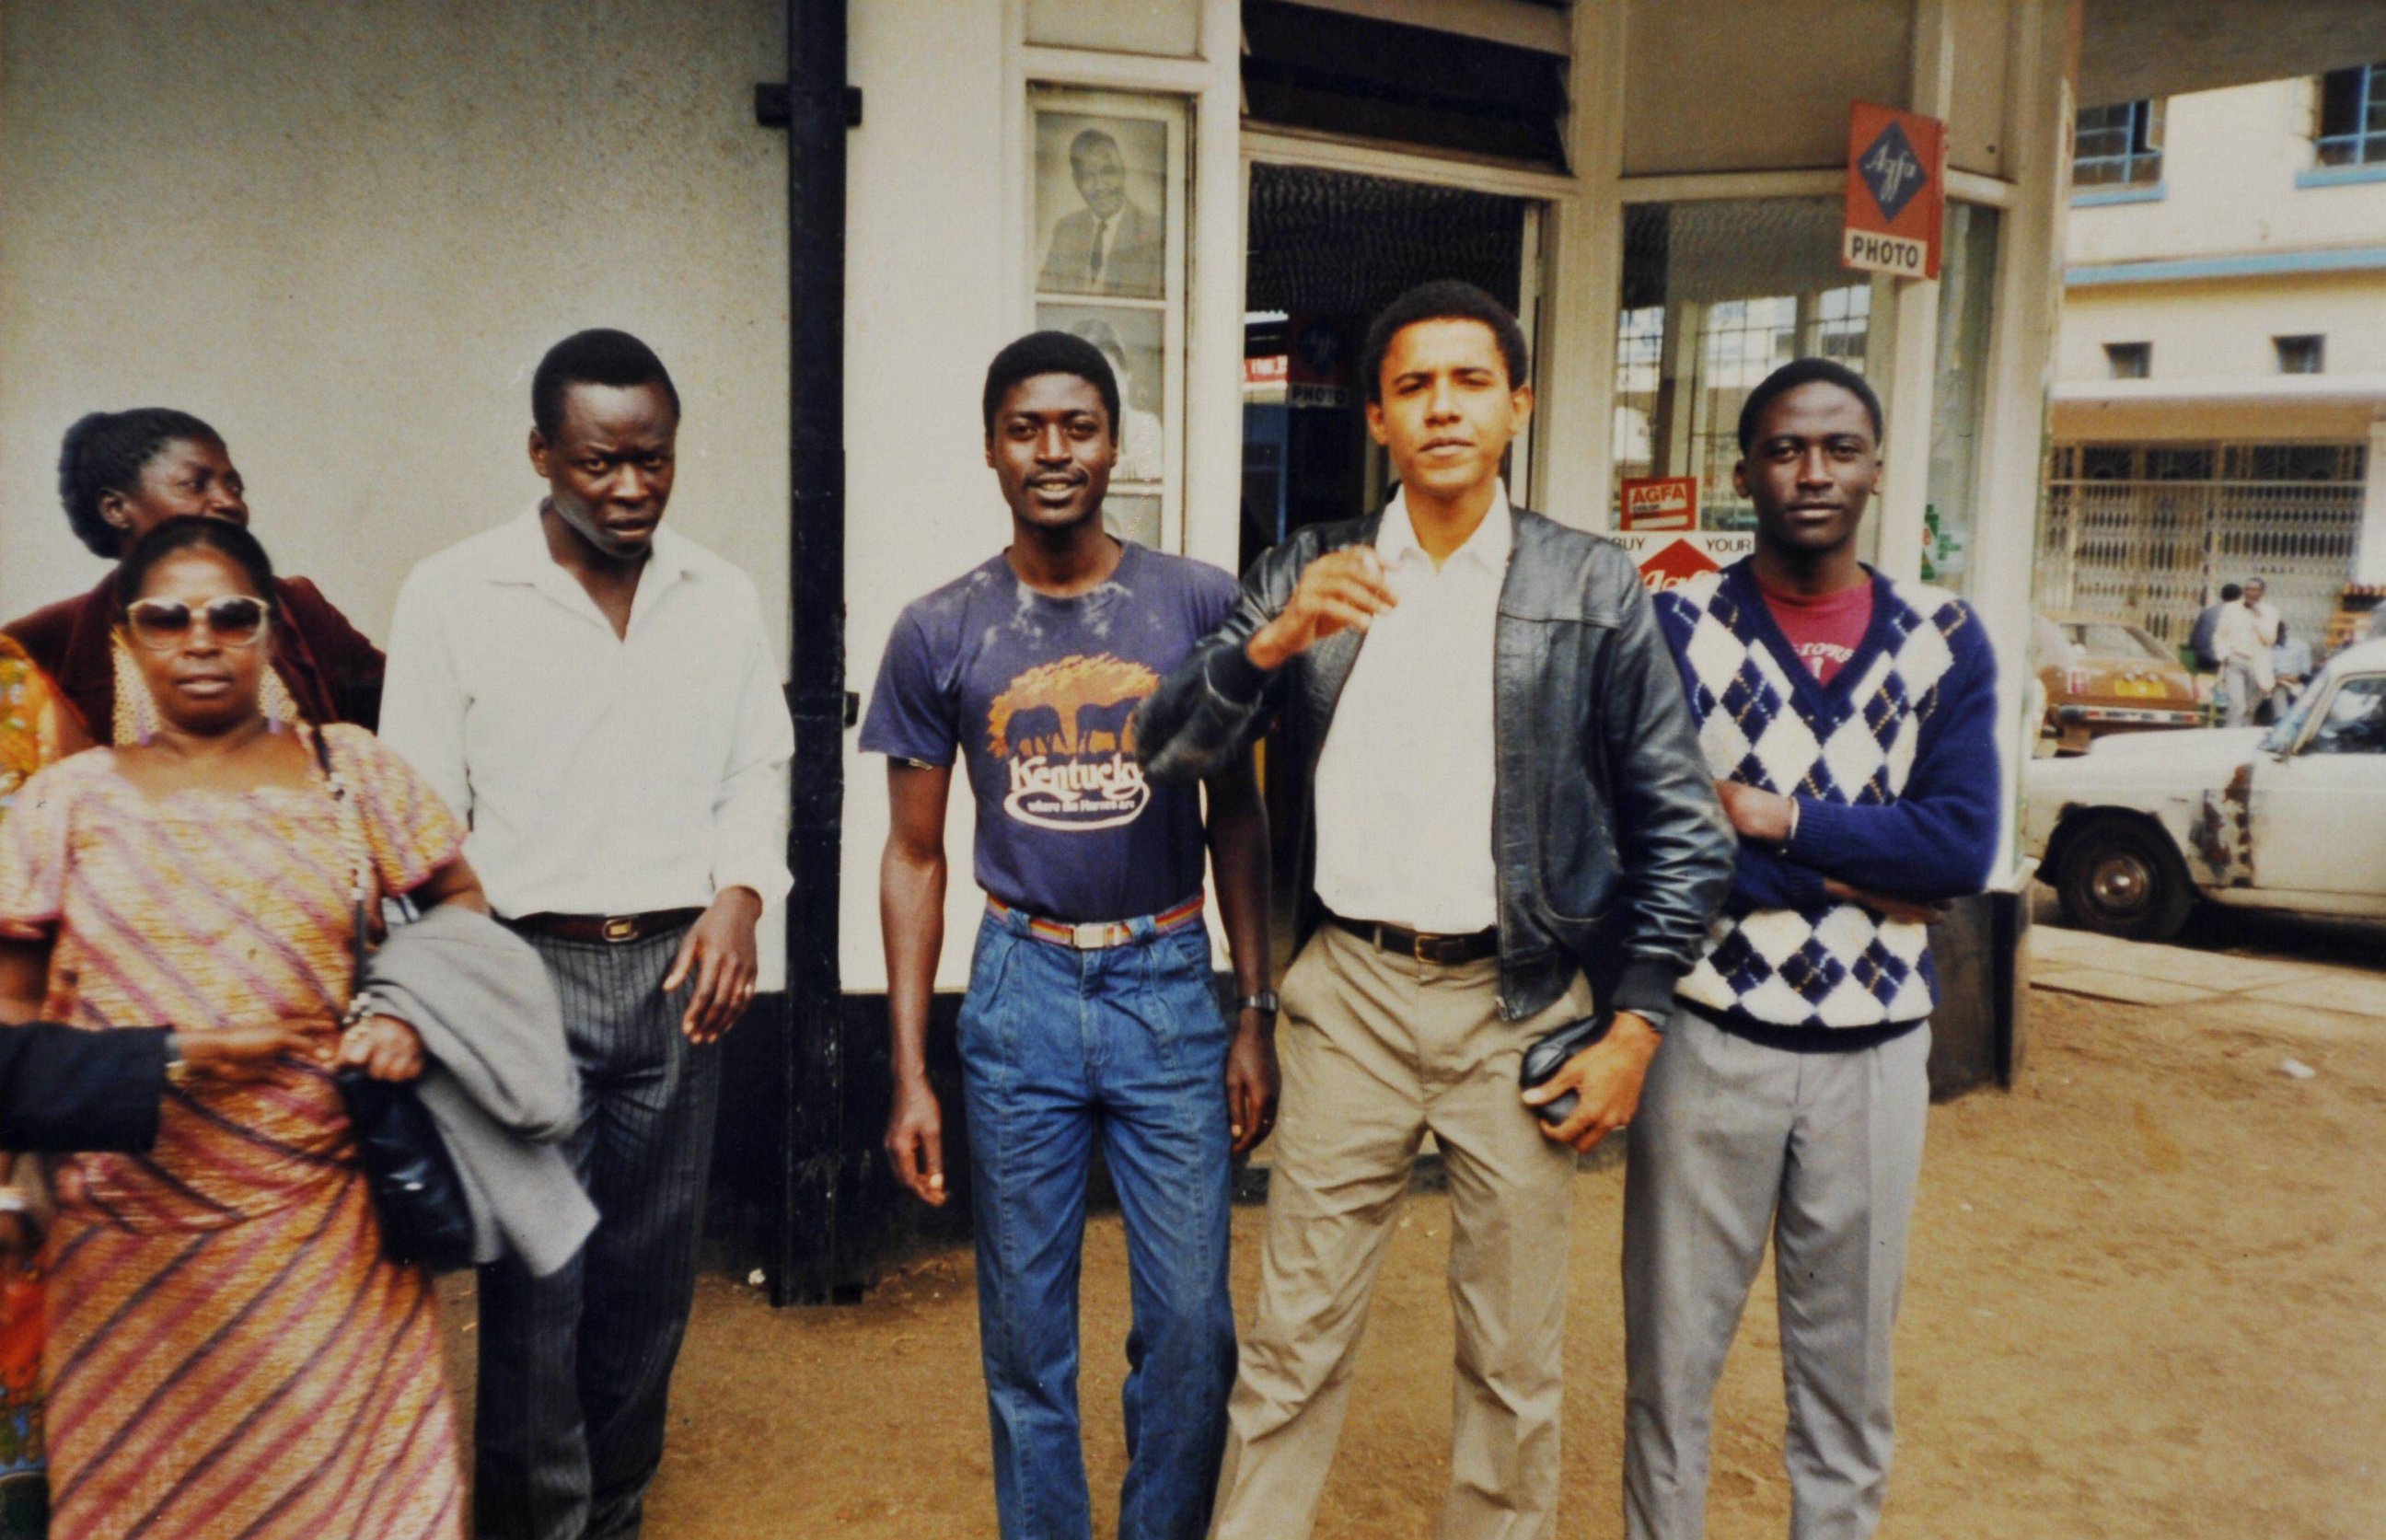 PHOTO: Barack Obama seen here in the late-1980s with members of his family in Nairobi, Kenya.